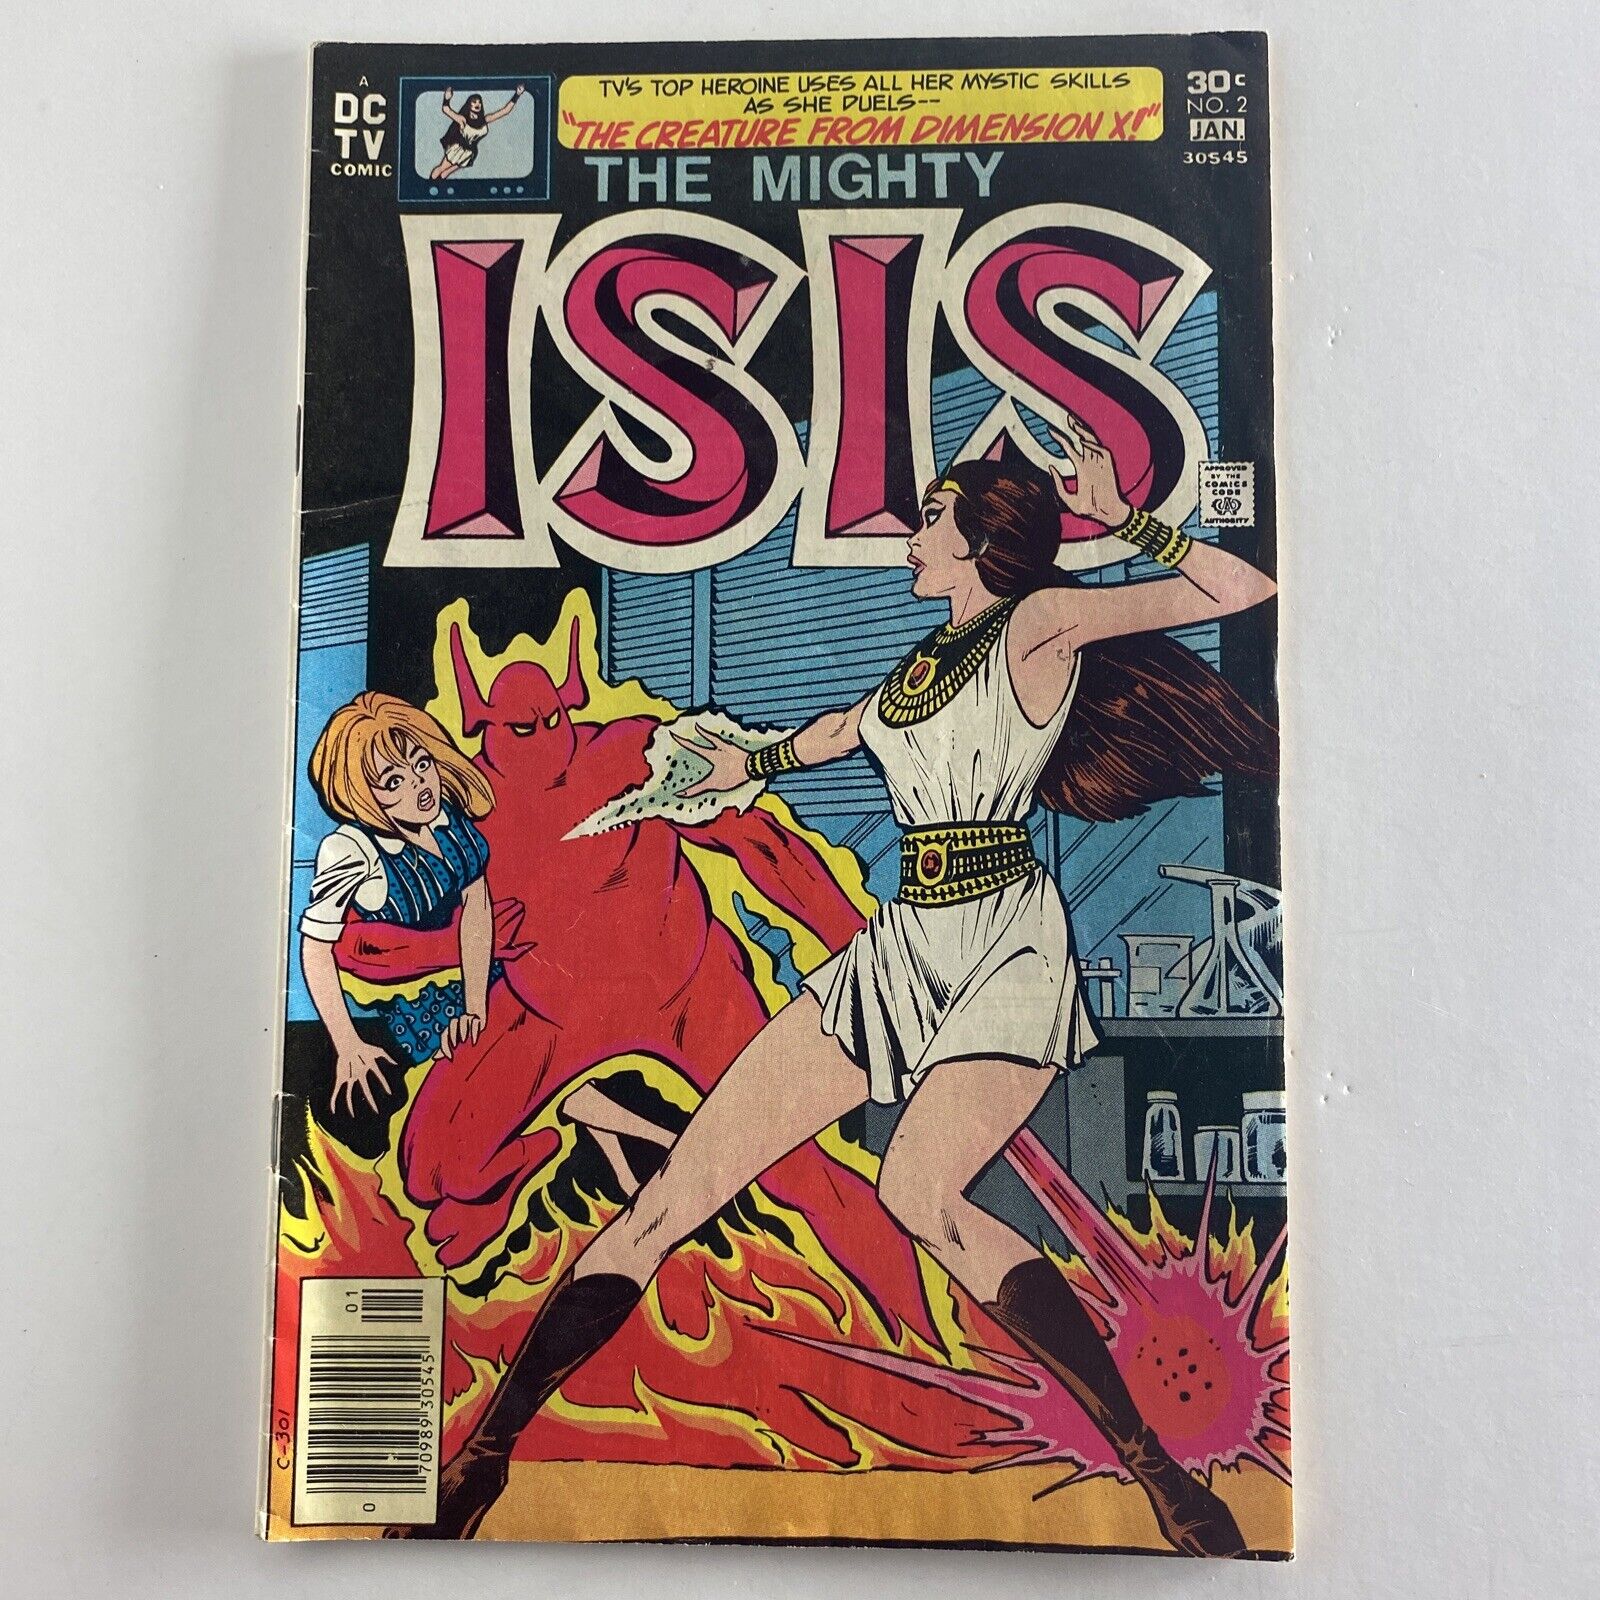 The Mighty Isis #2 DC TV Comic 1976 Saturday Morning TV Bronze Age